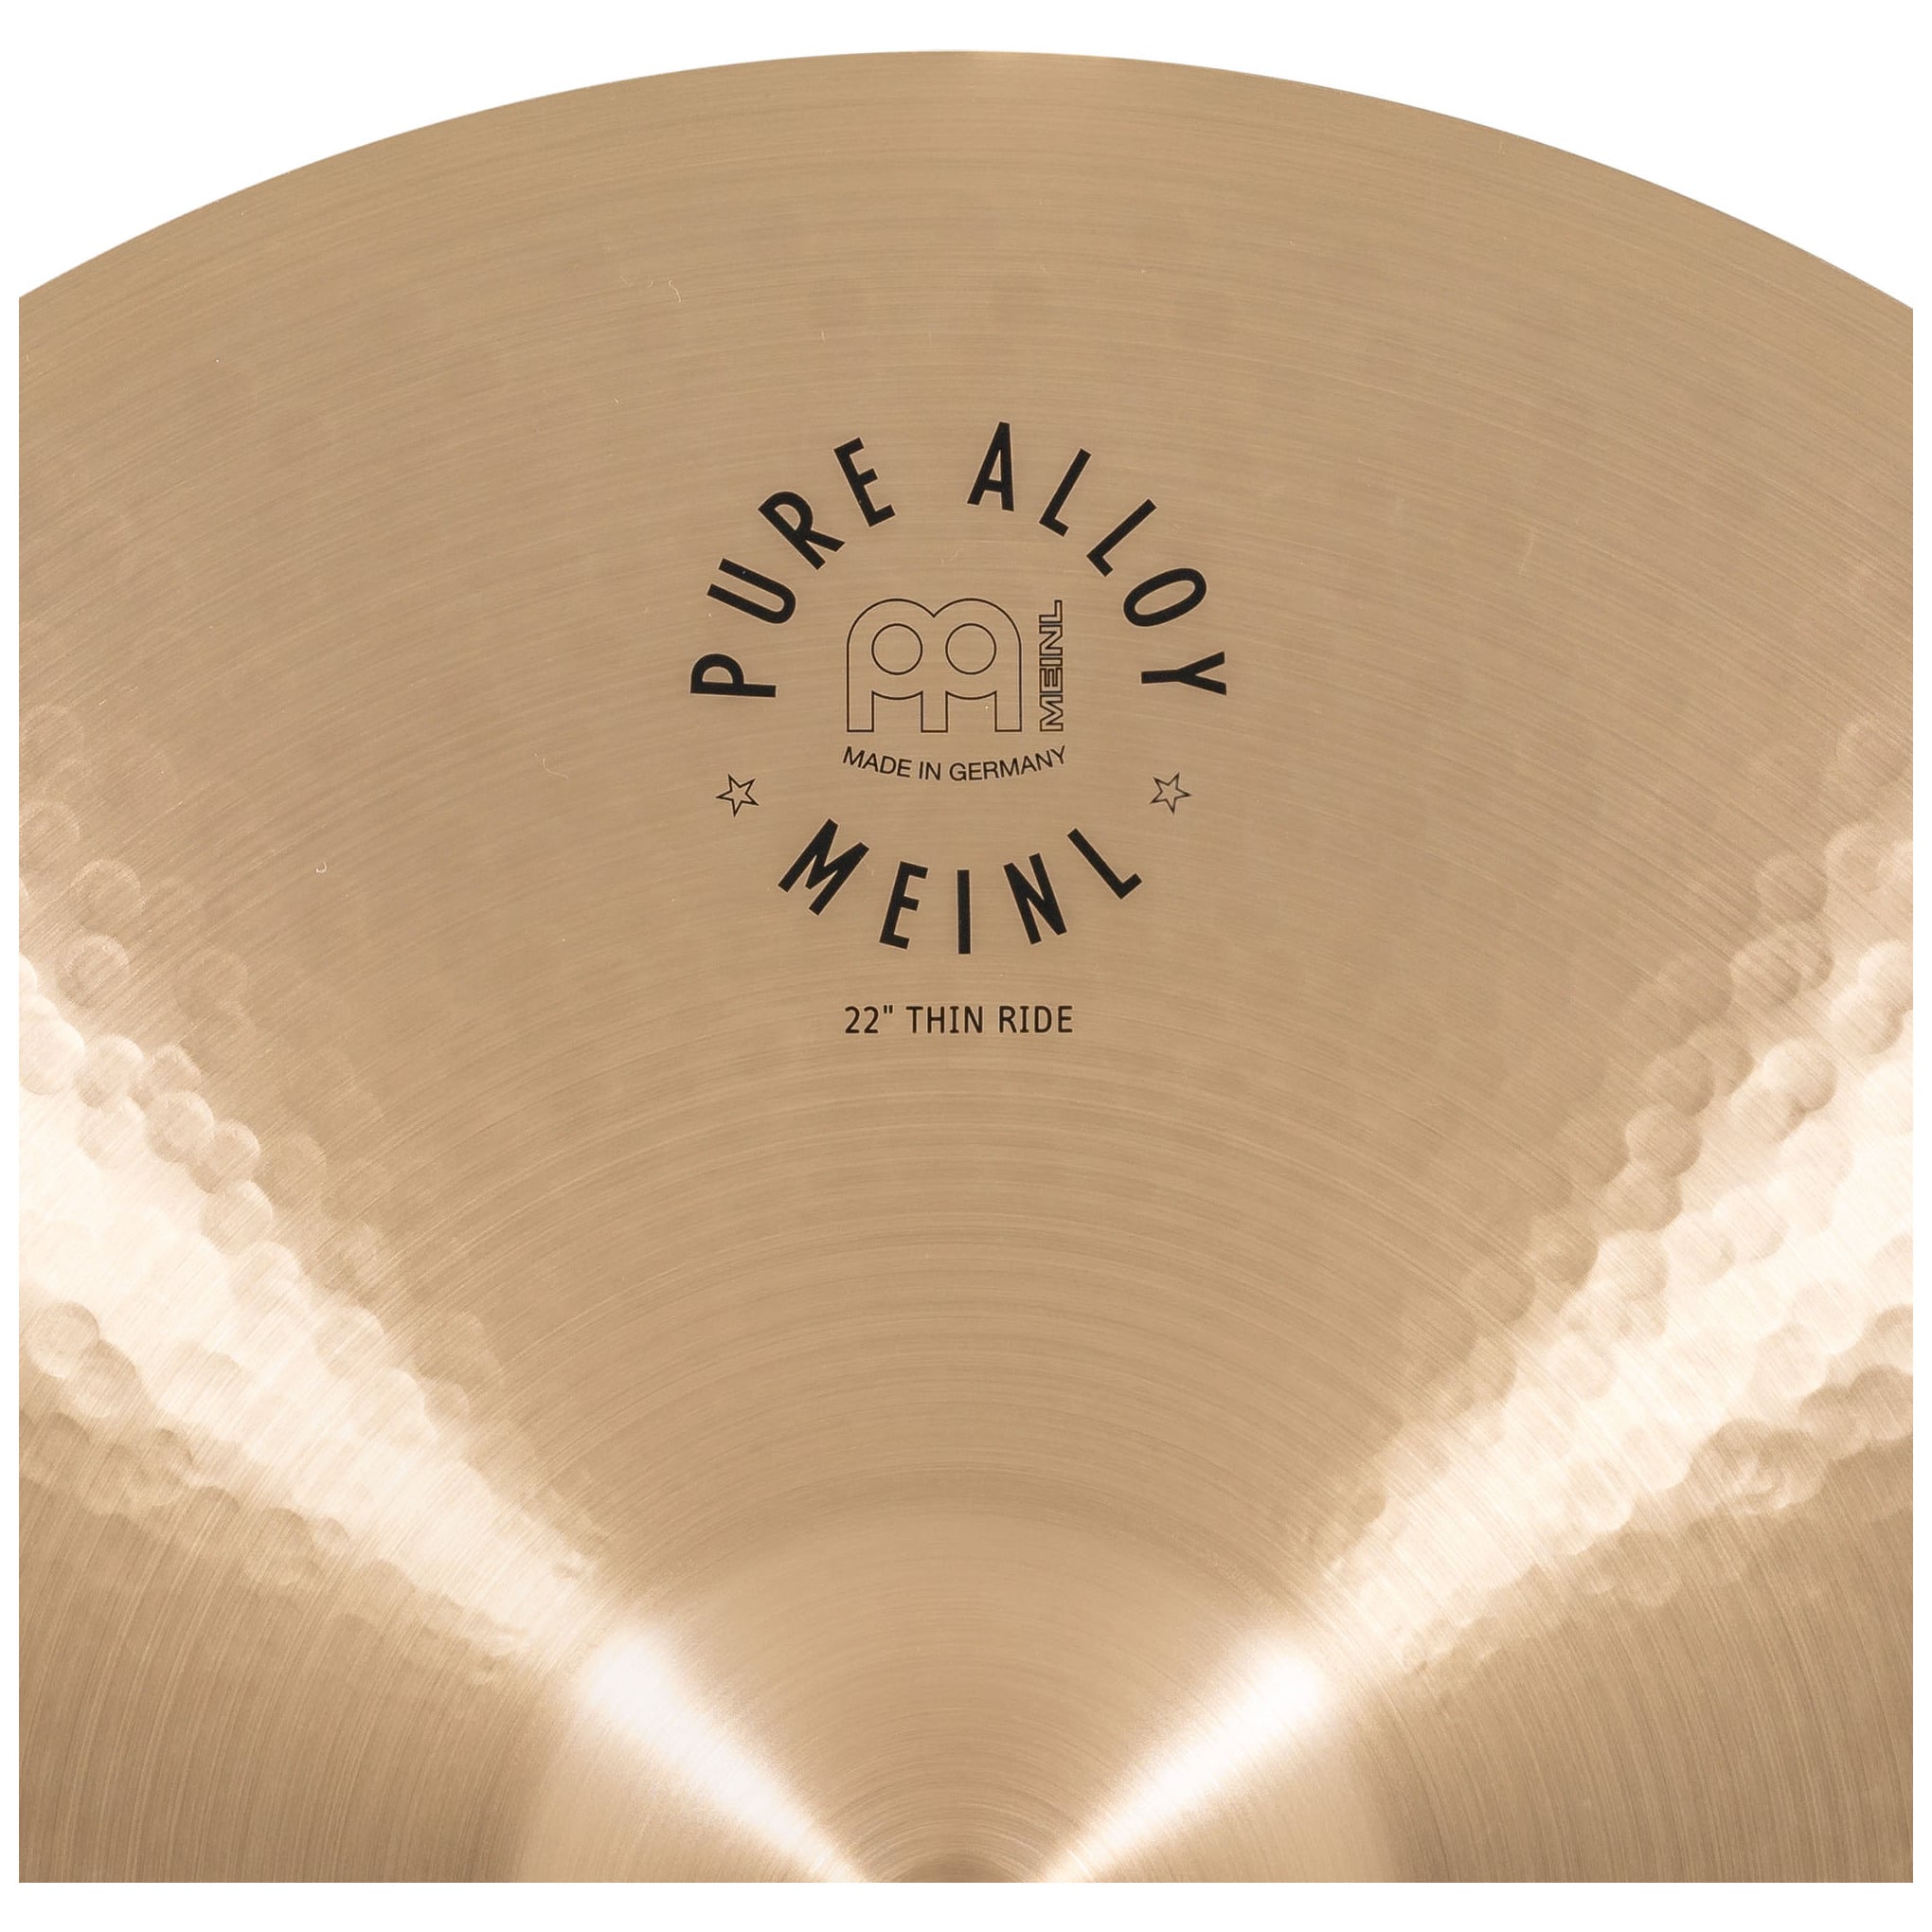 Meinl Cymbals PA22TR - 22" Pure Alloy Thin Ride 7